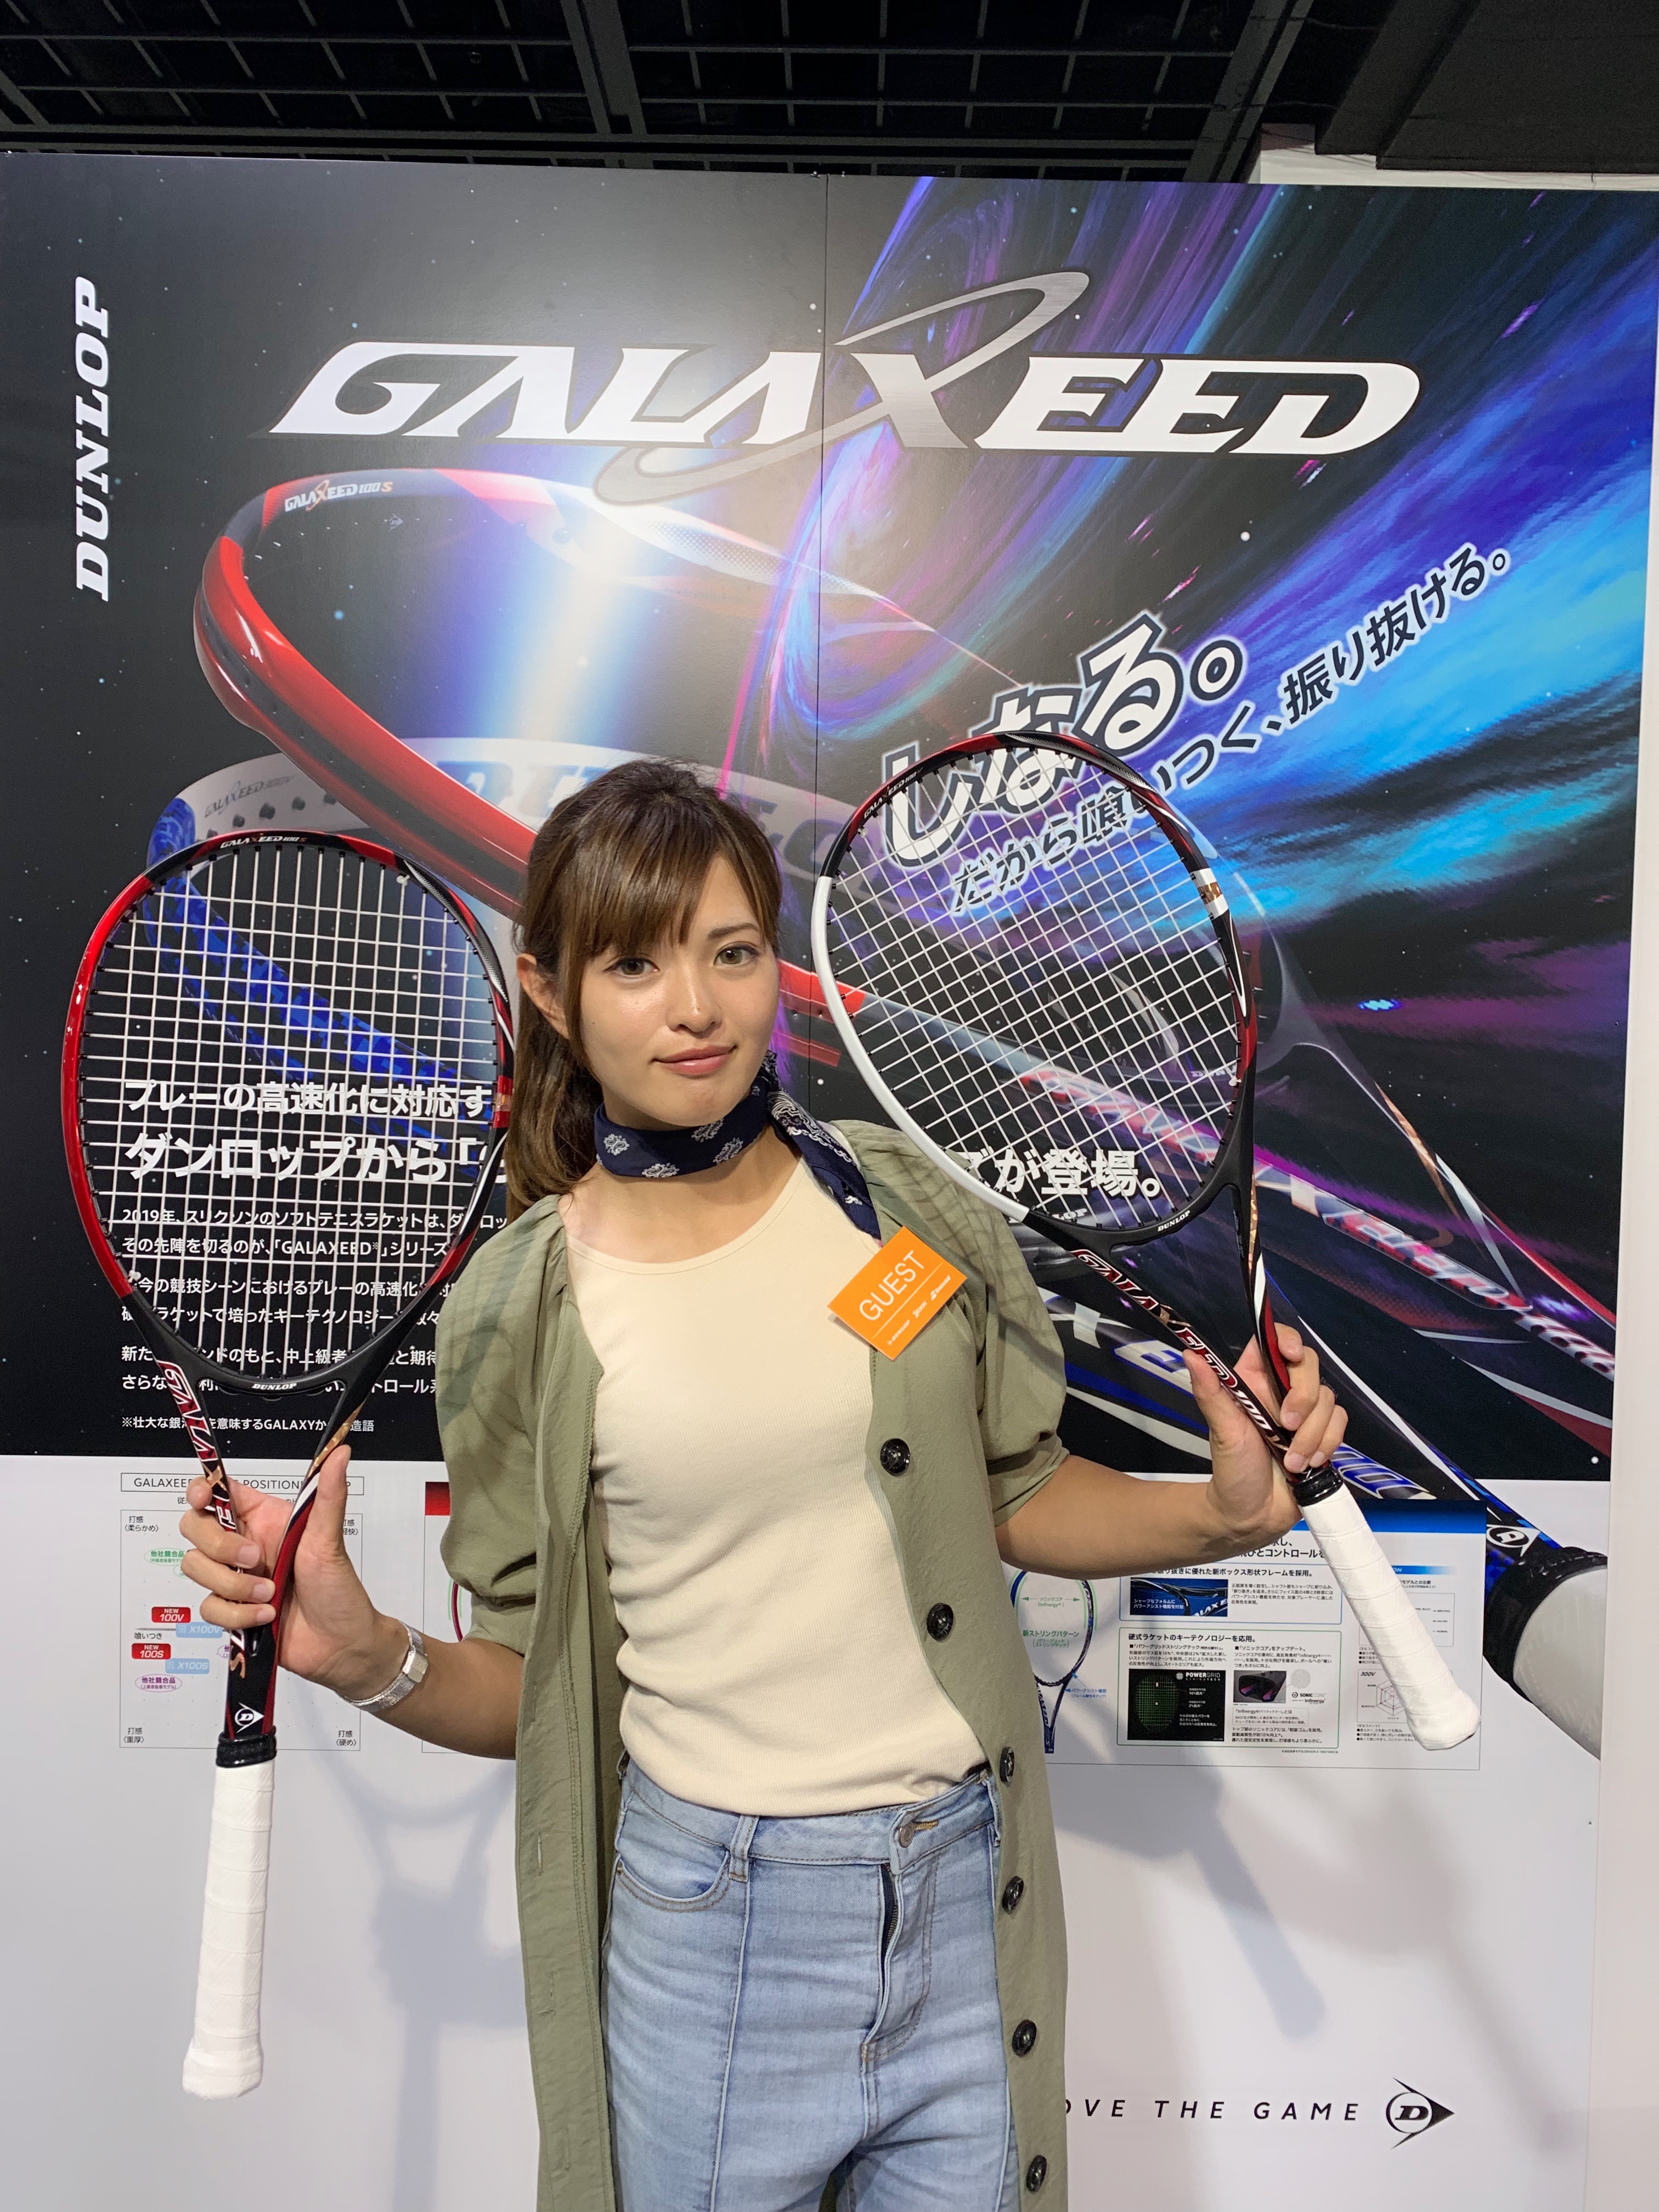 DUNLOP GALAXEED 100V ソフトテニス ラケット